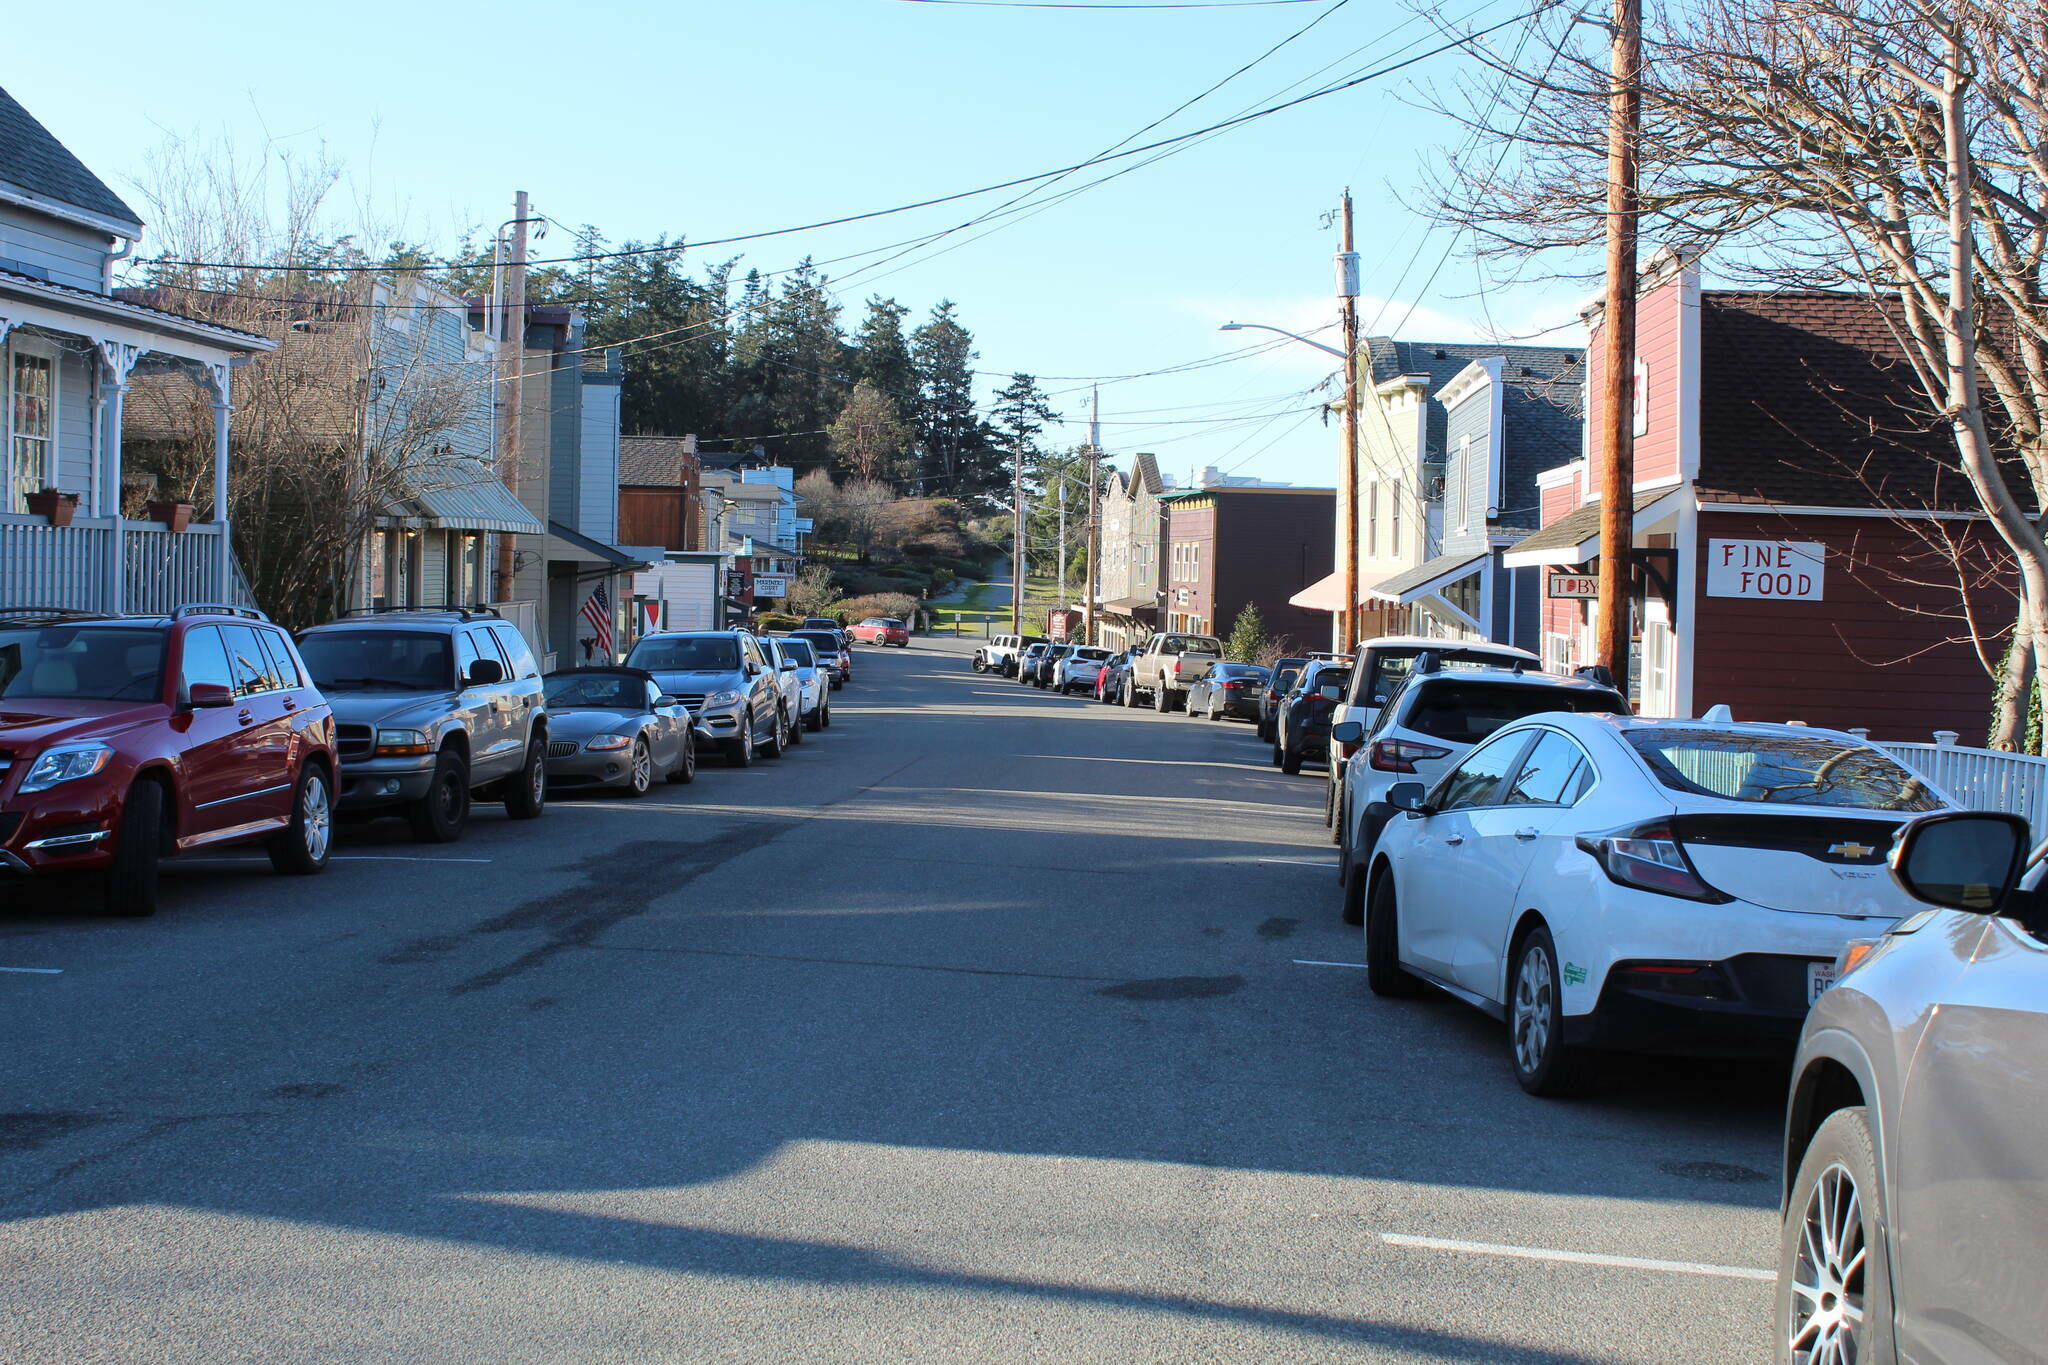 Coupeville town officials voted to make Front Street one way and add angled parking to make the historic downtown area more pedestrian-friendly. (File photo by Karina Andrew/Whidbey News-Times)